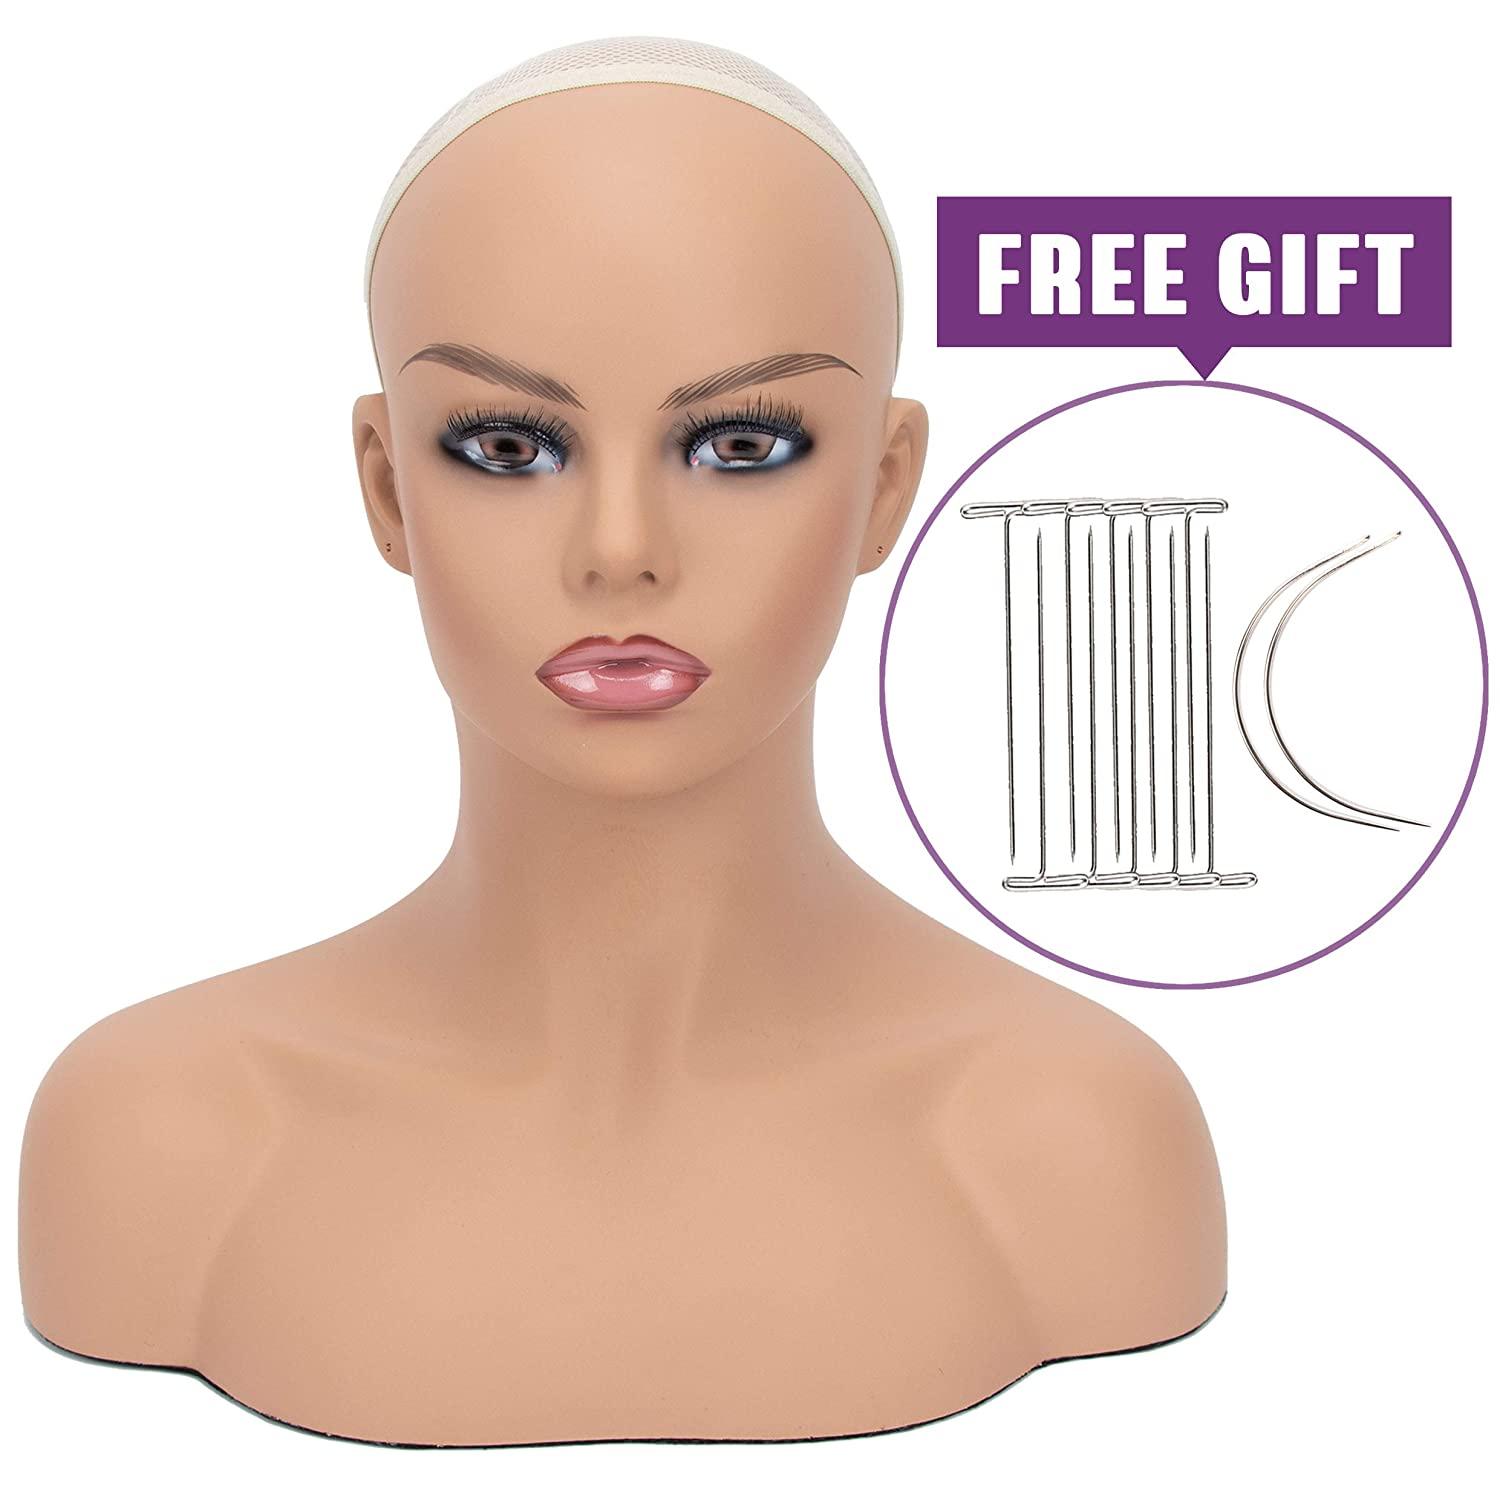 USA Warehouse Free Ship Wig Stand PVC Training Mannequin Heads Realistic  Half Body Double Shoulder For Display Wigs Hat Jewelry From Forulucky,  $45.31